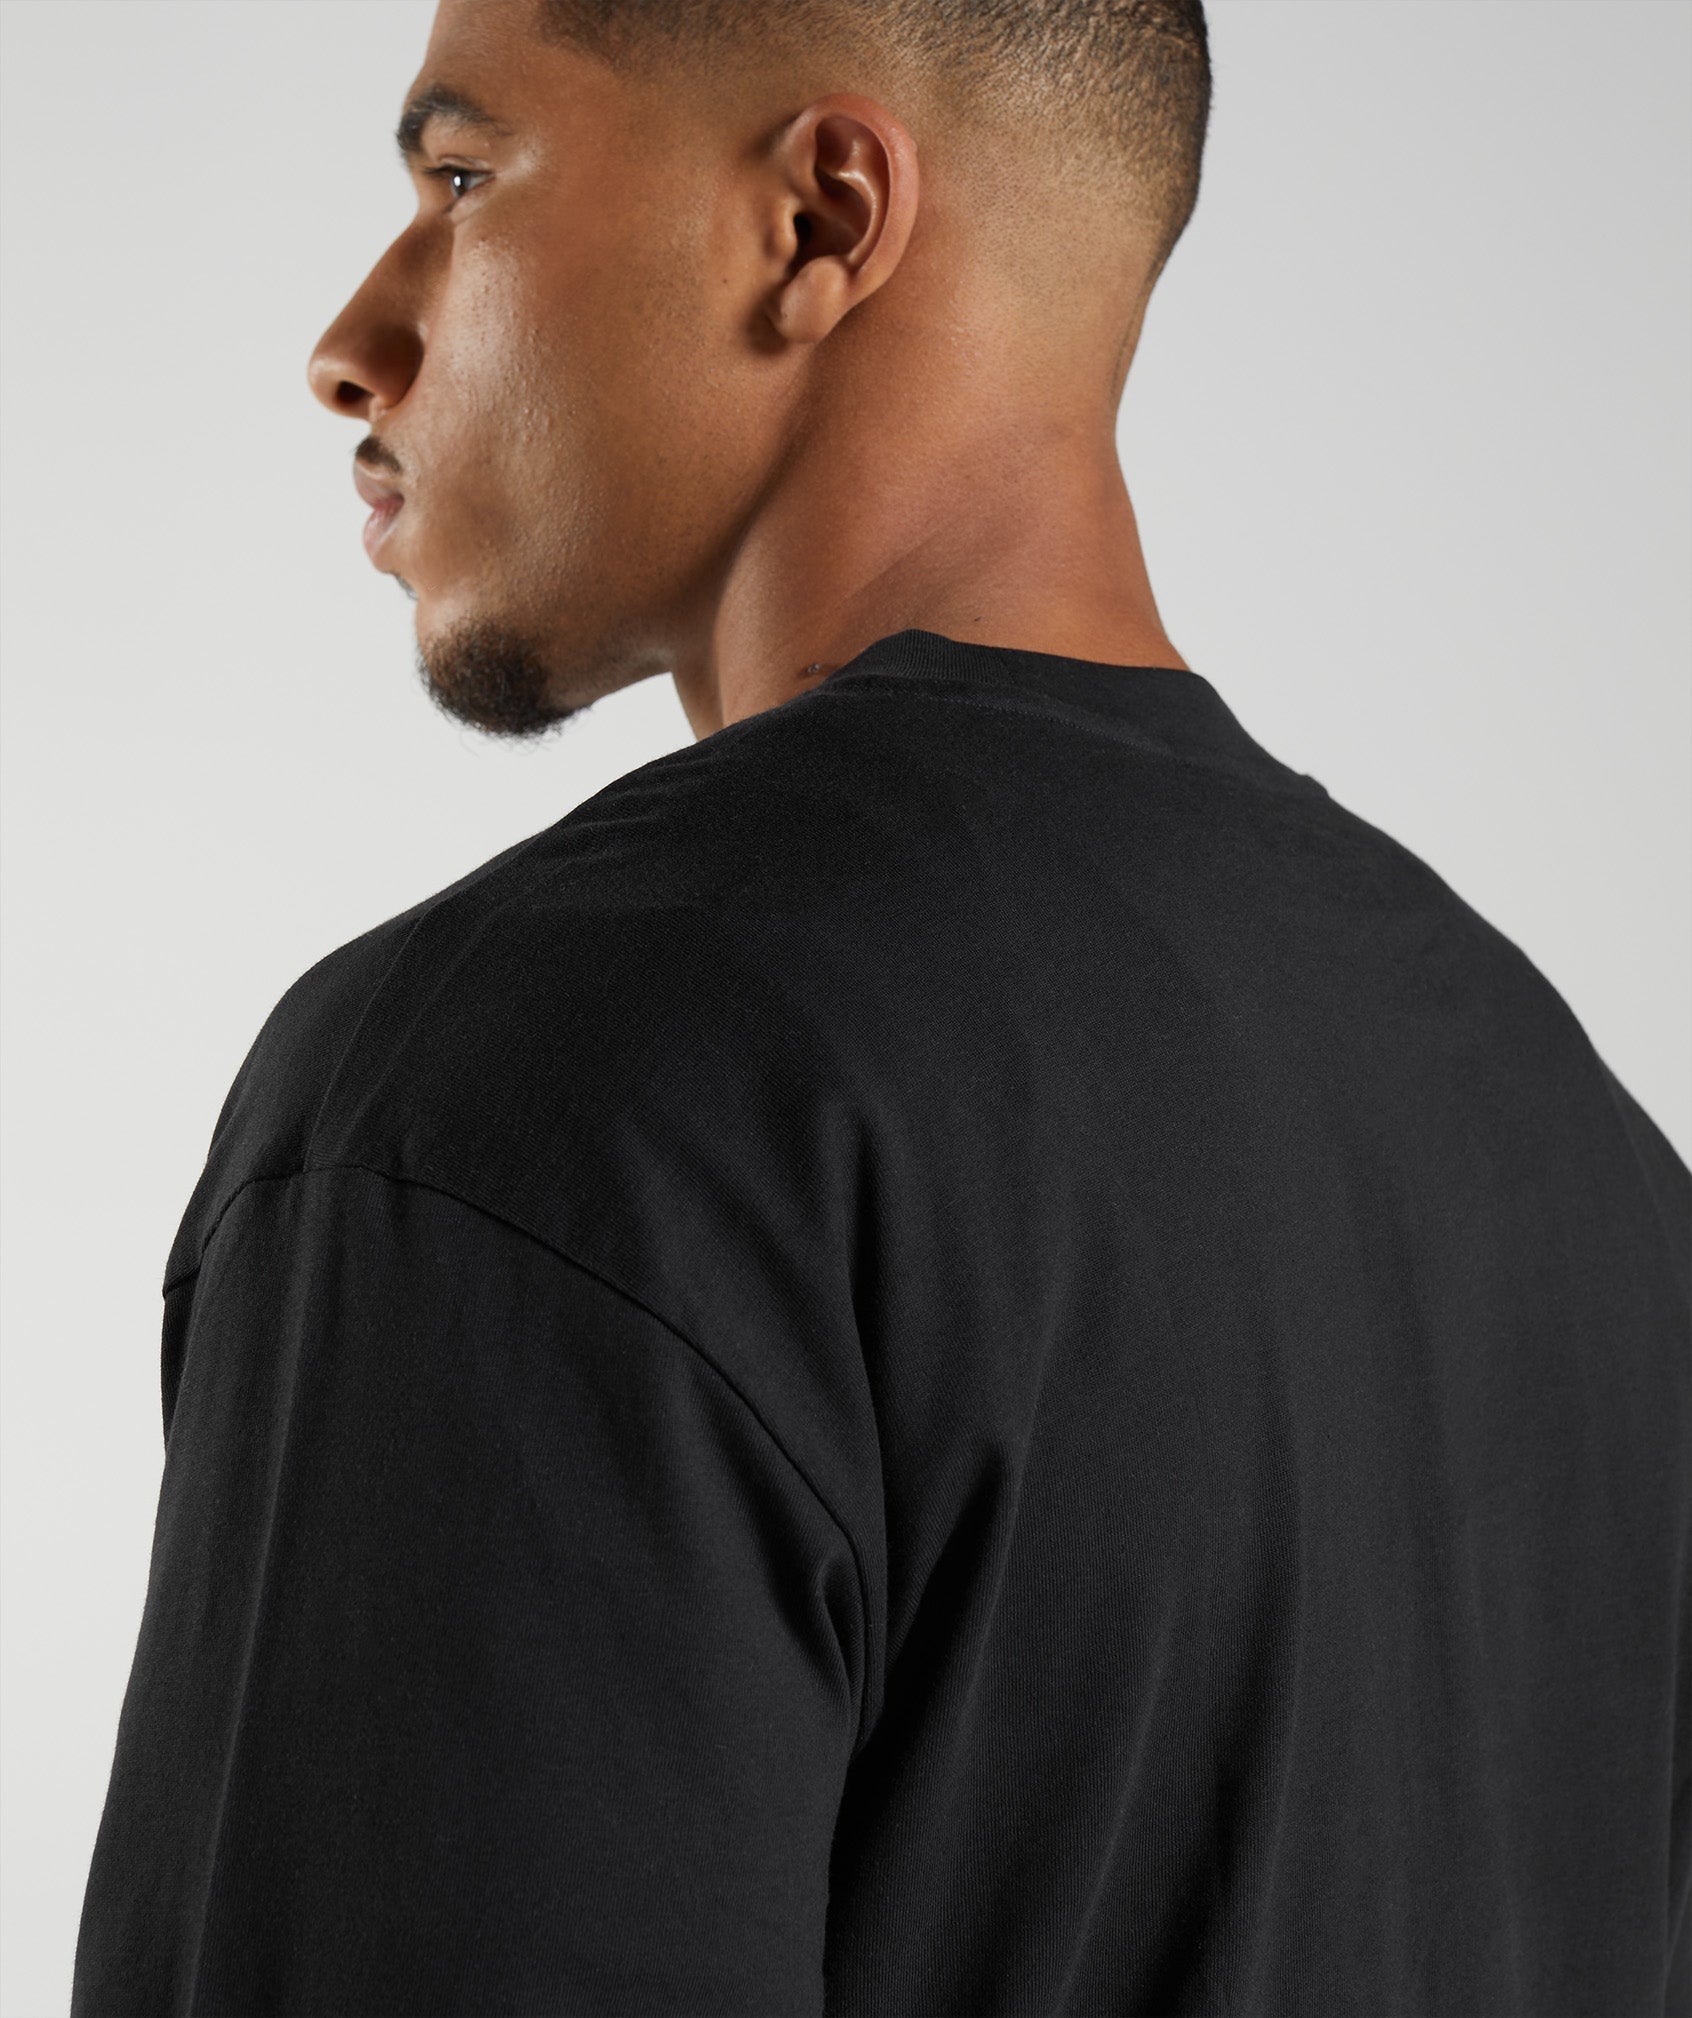 Rest Day Sweats Long Sleeve T-Shirt in Black - view 7